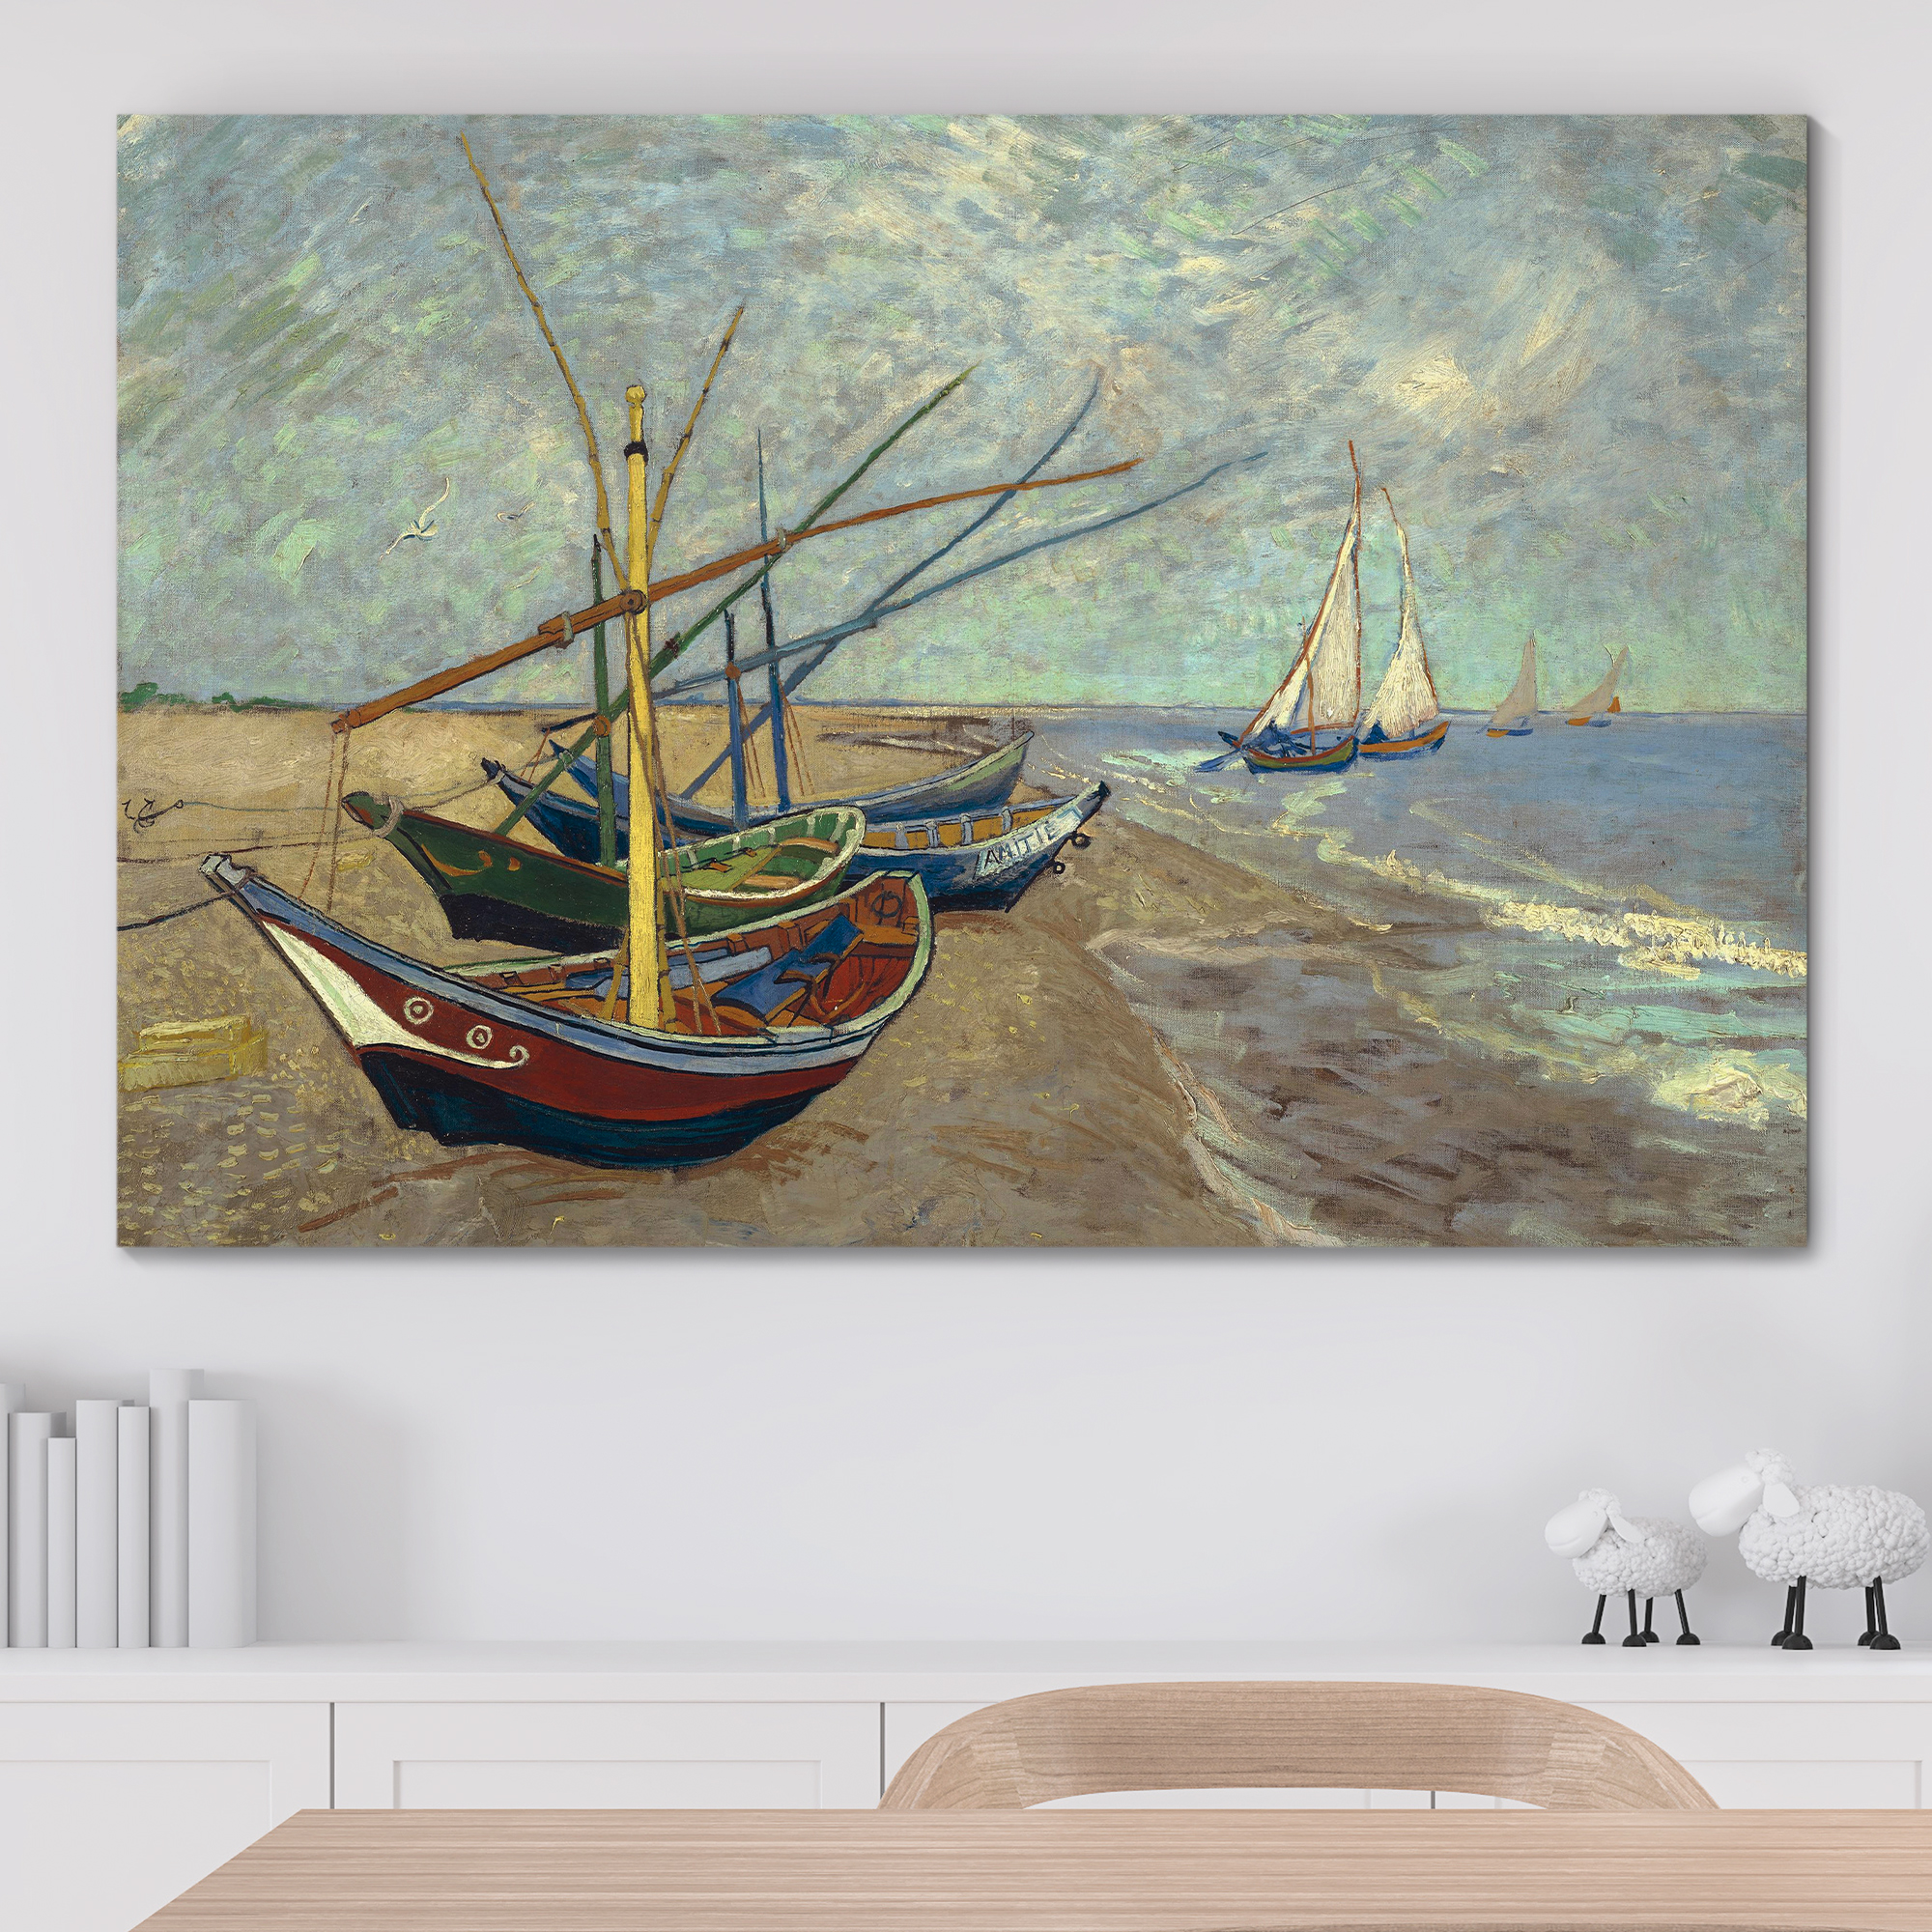 Fishing Boats on the Beach at Les Saintes Maries de la Mer by Vincent Van Gogh Oil Painting Reproduction 12x18 inches